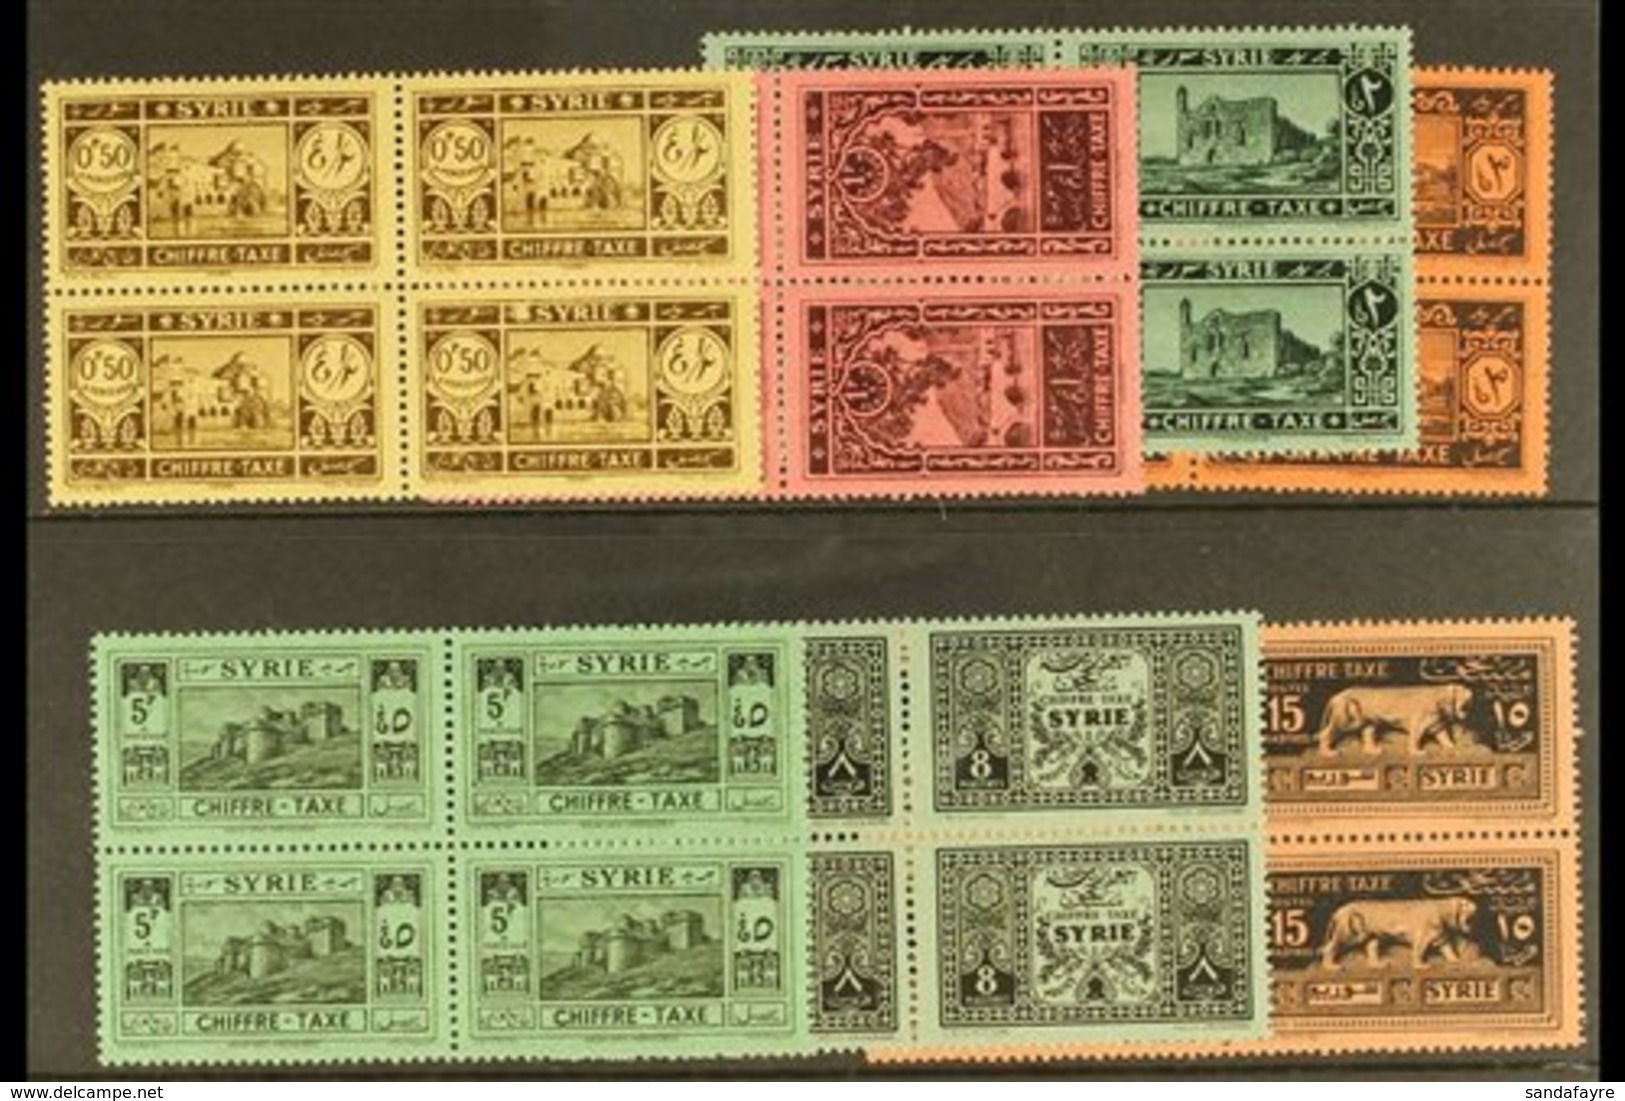 POSTAGE DUE 1925-31. Complete Set, SG D192/98, Never Hinged Mint Blocks Of 4, Some Perf Splitting On . Lovely (28 Stamps - Syria